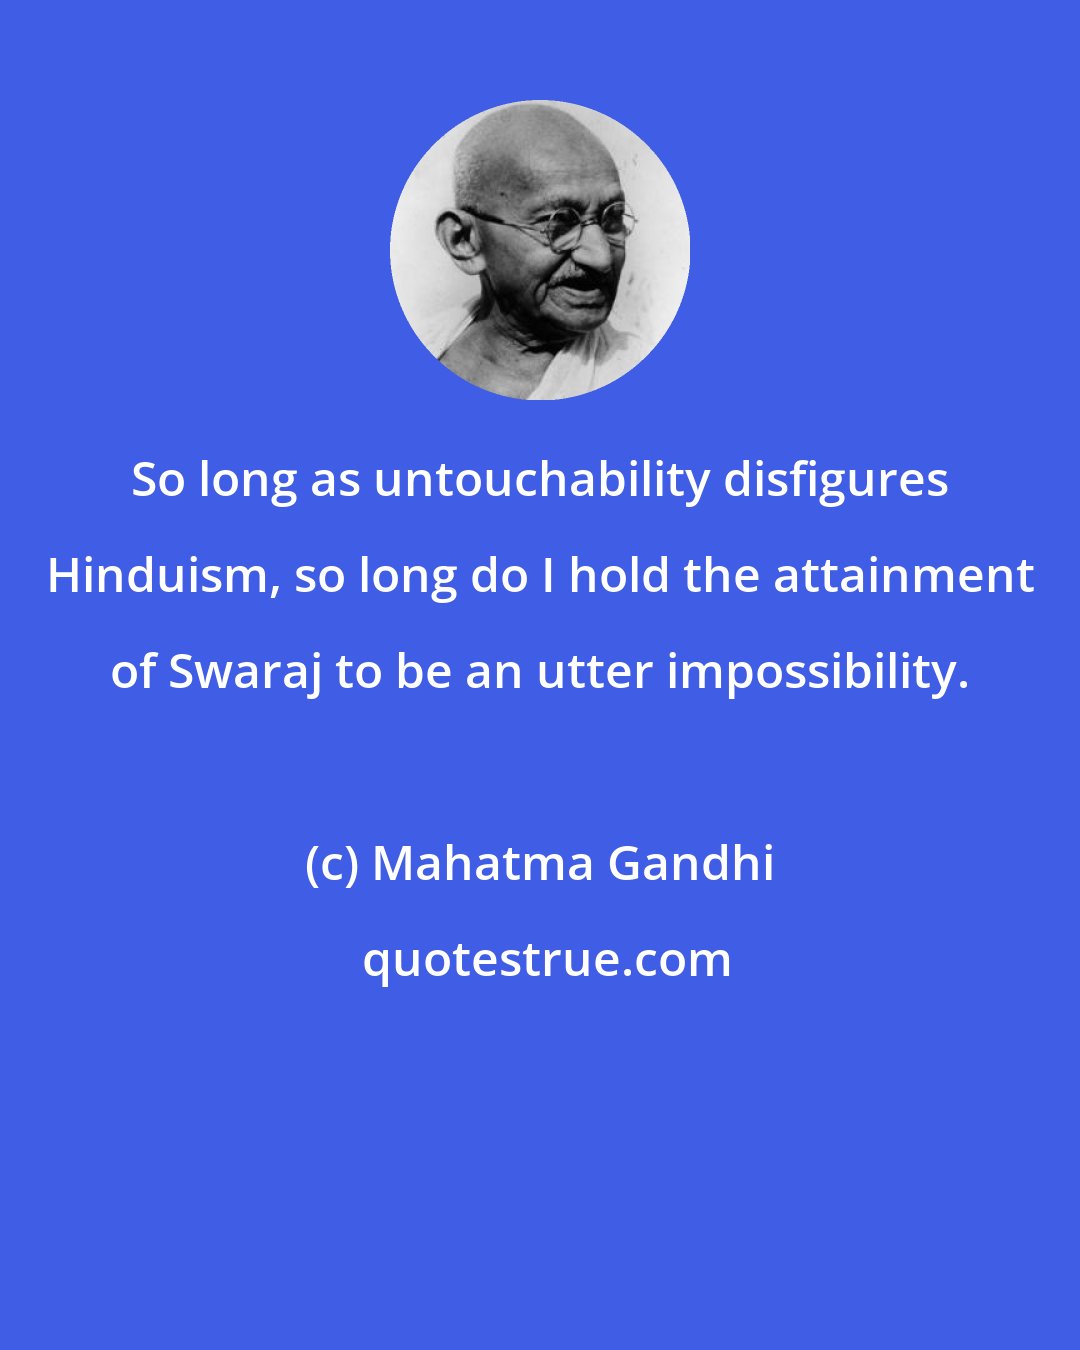 Mahatma Gandhi: So long as untouchability disfigures Hinduism, so long do I hold the attainment of Swaraj to be an utter impossibility.